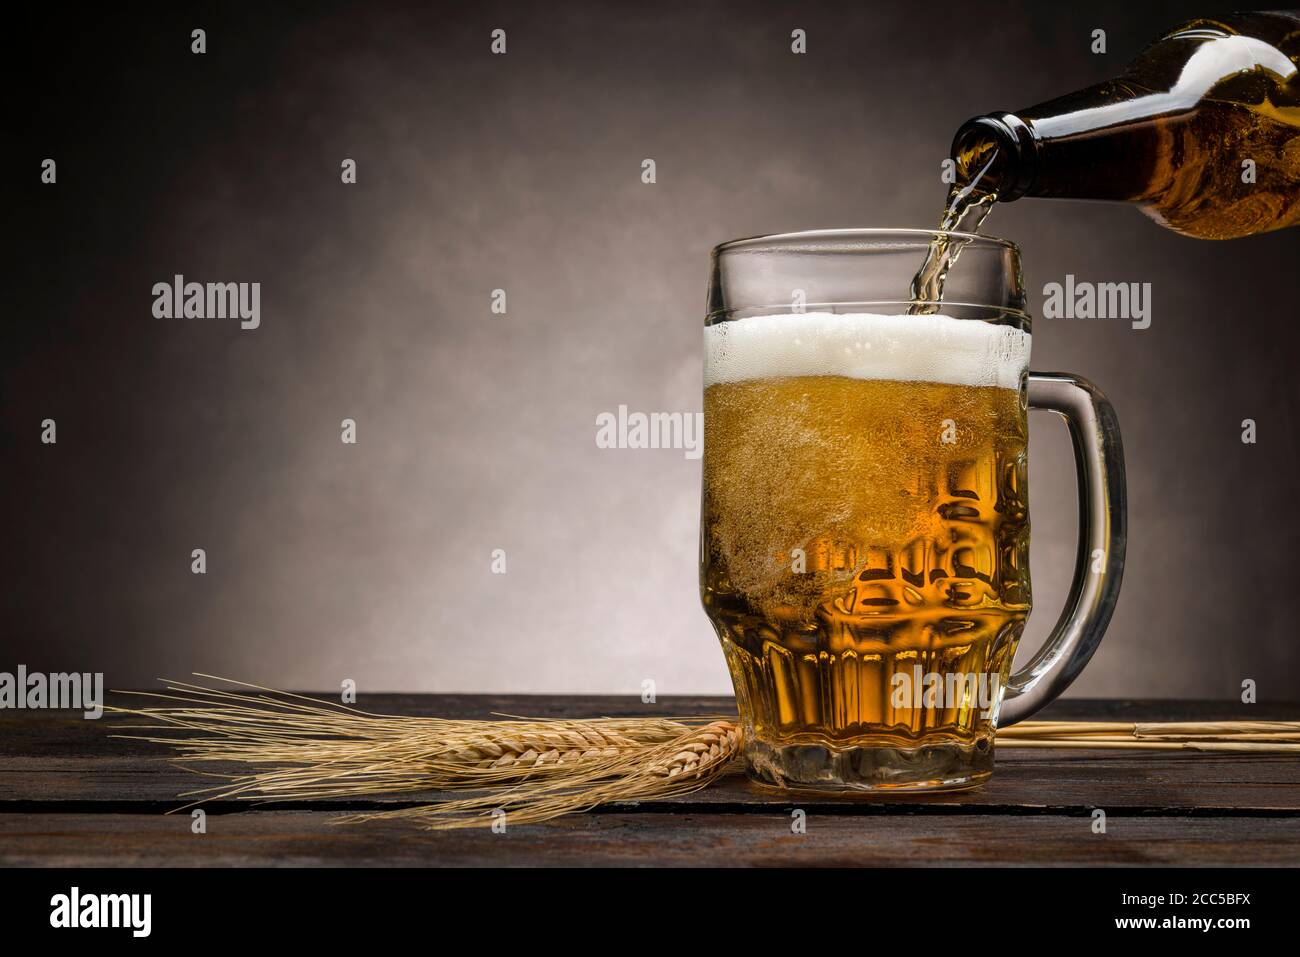 pouring blonde beer into glass pint on wooden table with ears of wheat Stock Photo